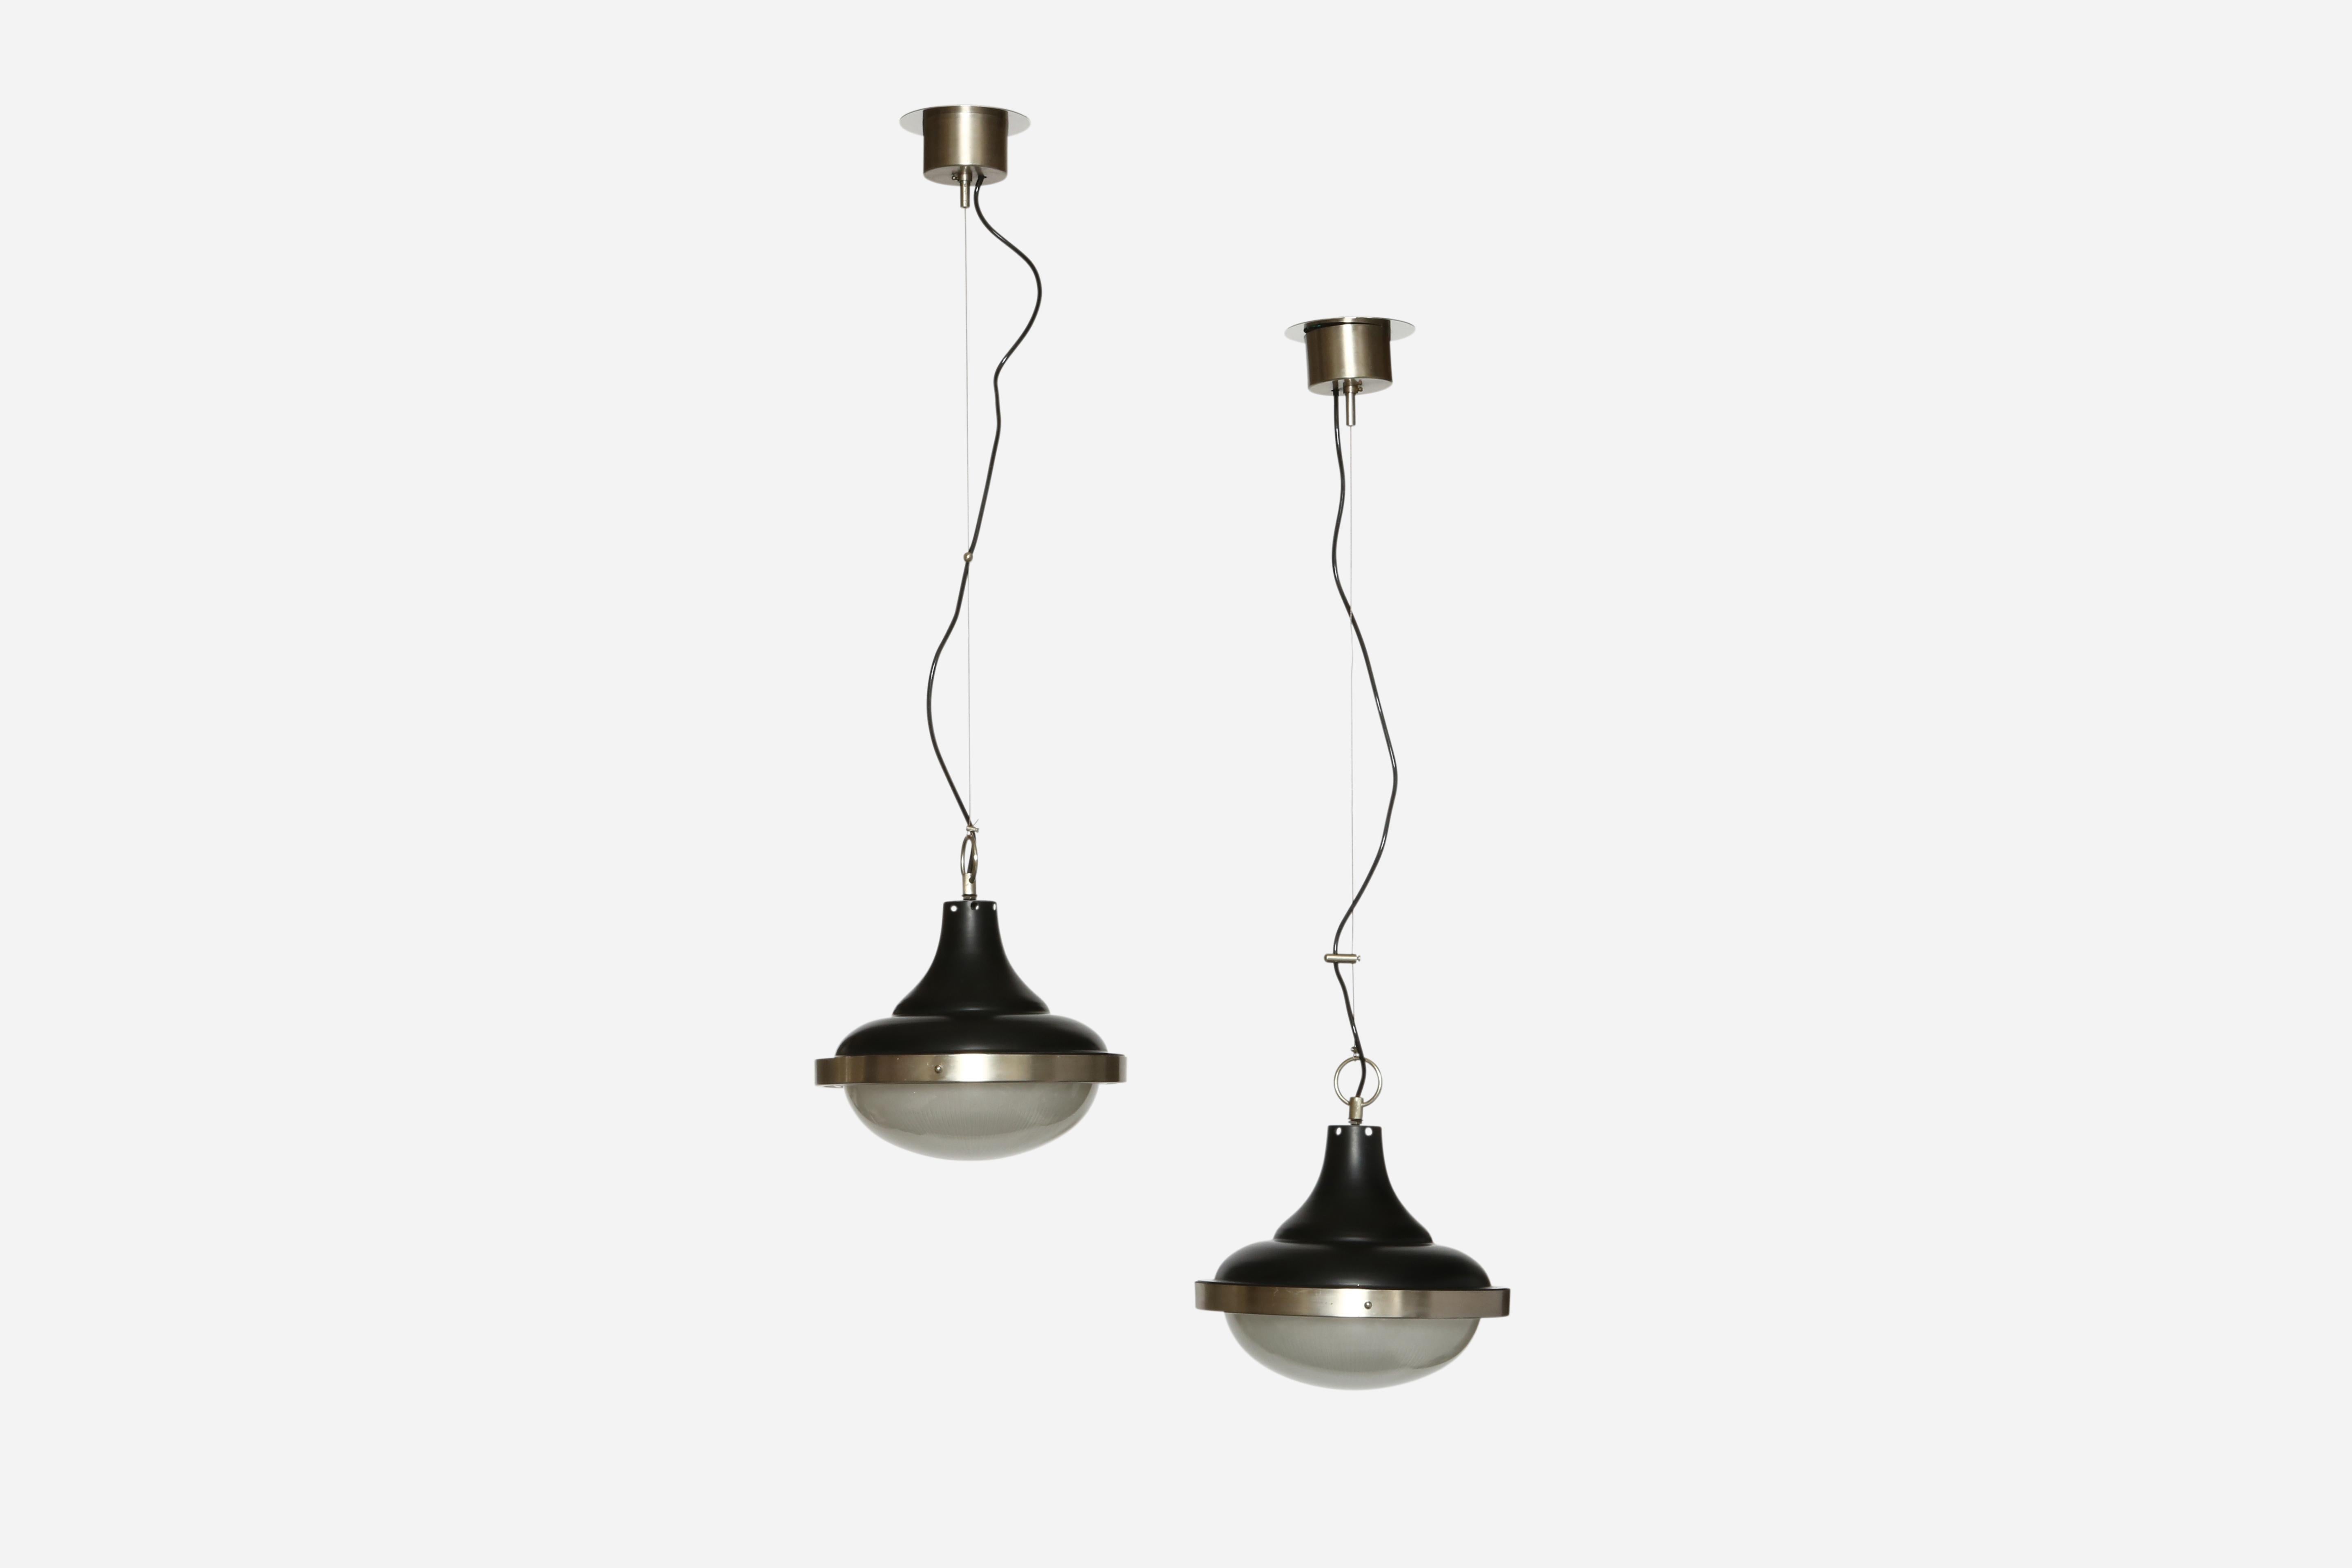 Sergio Mazza style suspension lights, a pair.
Designed and manufactured in Italy, 1960s
Glass, enameled metal, nickel plated brass.
Overall drop is adjustable.
Takes one medium bulb each.
Complimentary US rewiring upon request.

We take pride in